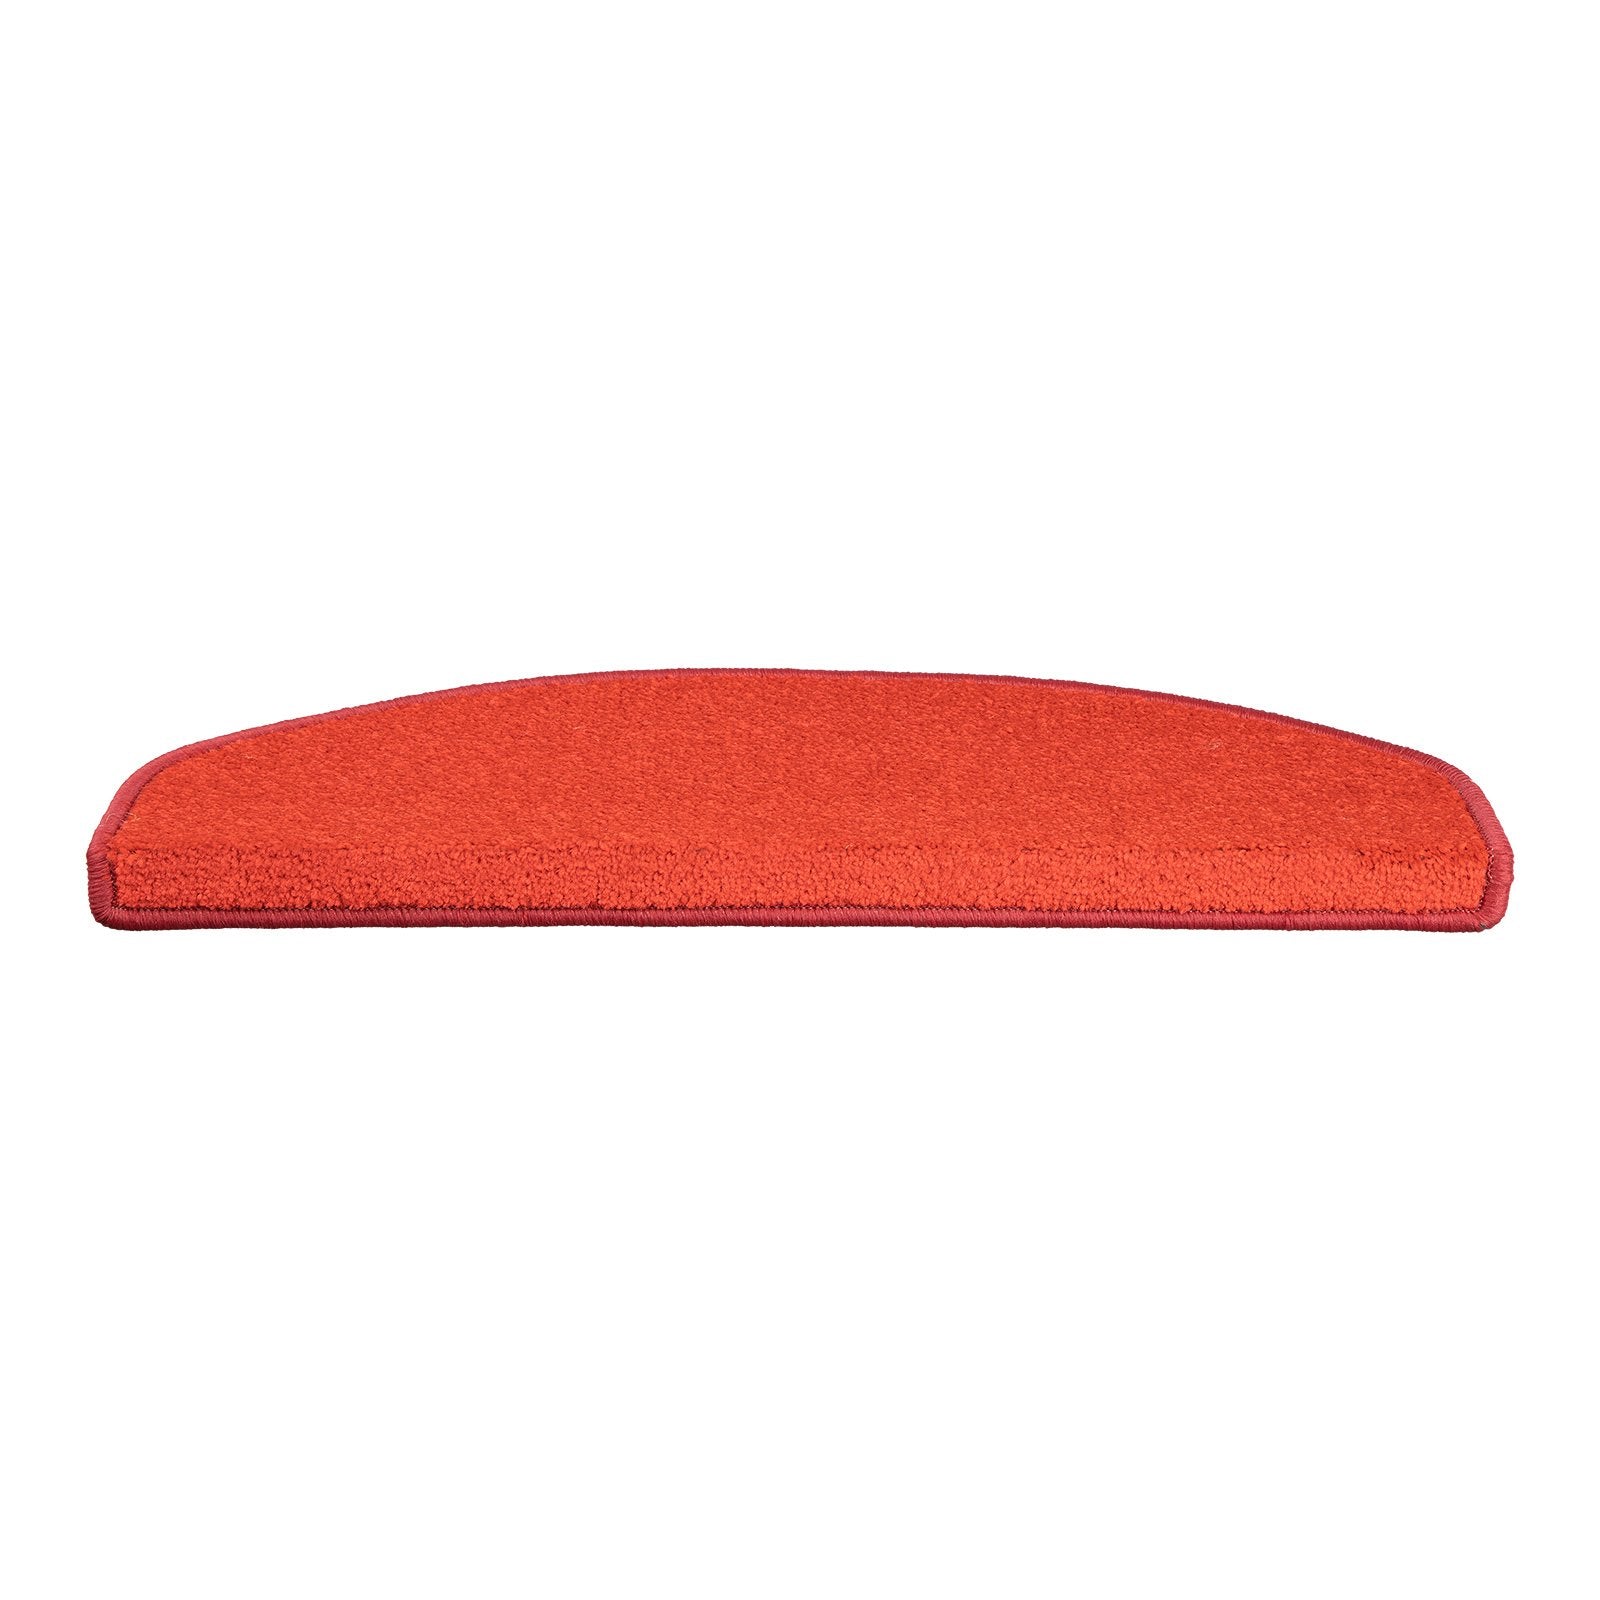 F5_fd-18510,fd-29022 | Rouge | Semicirculaire